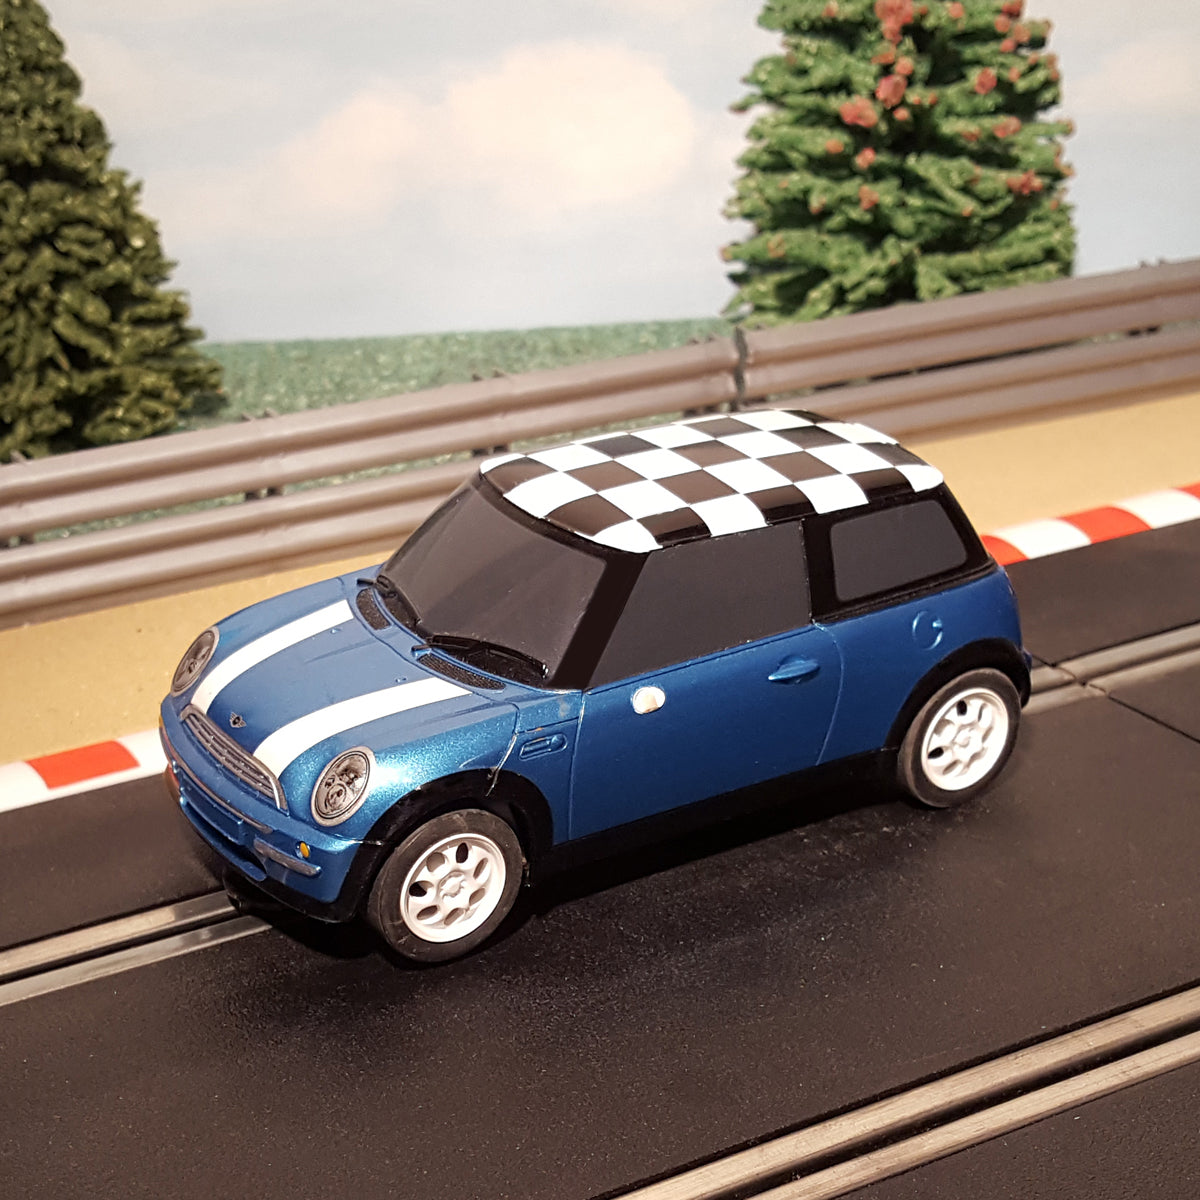 Scalextric 1:32 Car - Blue BMW Mini Cooper With Chequered Roof #M